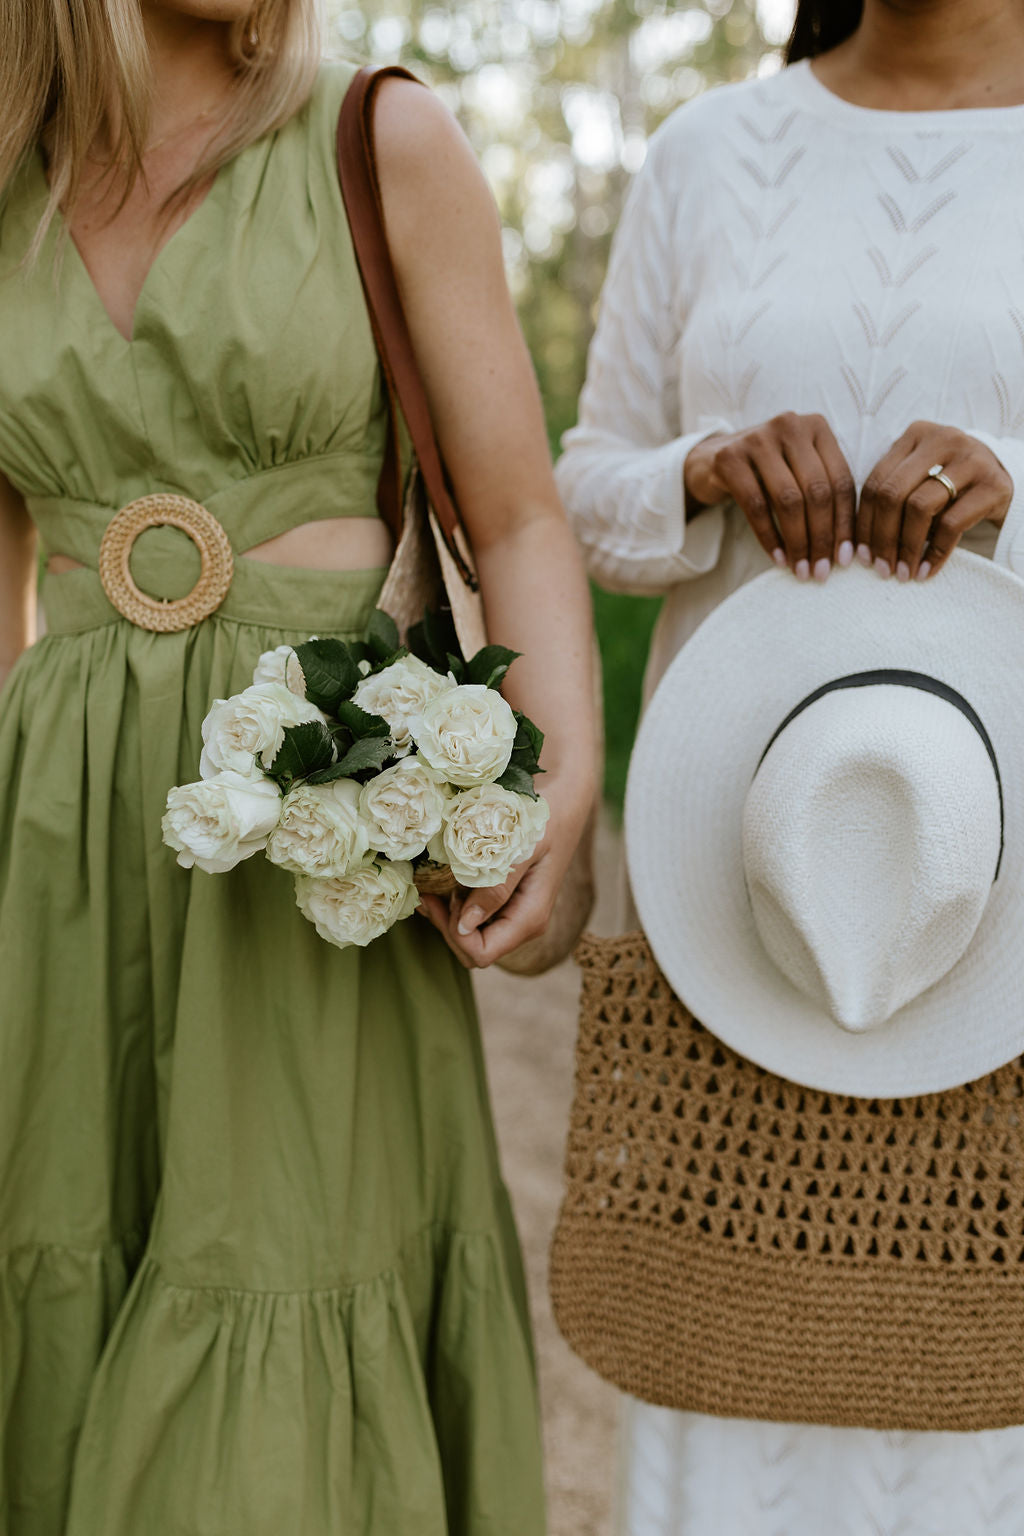 a close up on two women wearing dresses, one is holding flowers the other is holding a sun hat